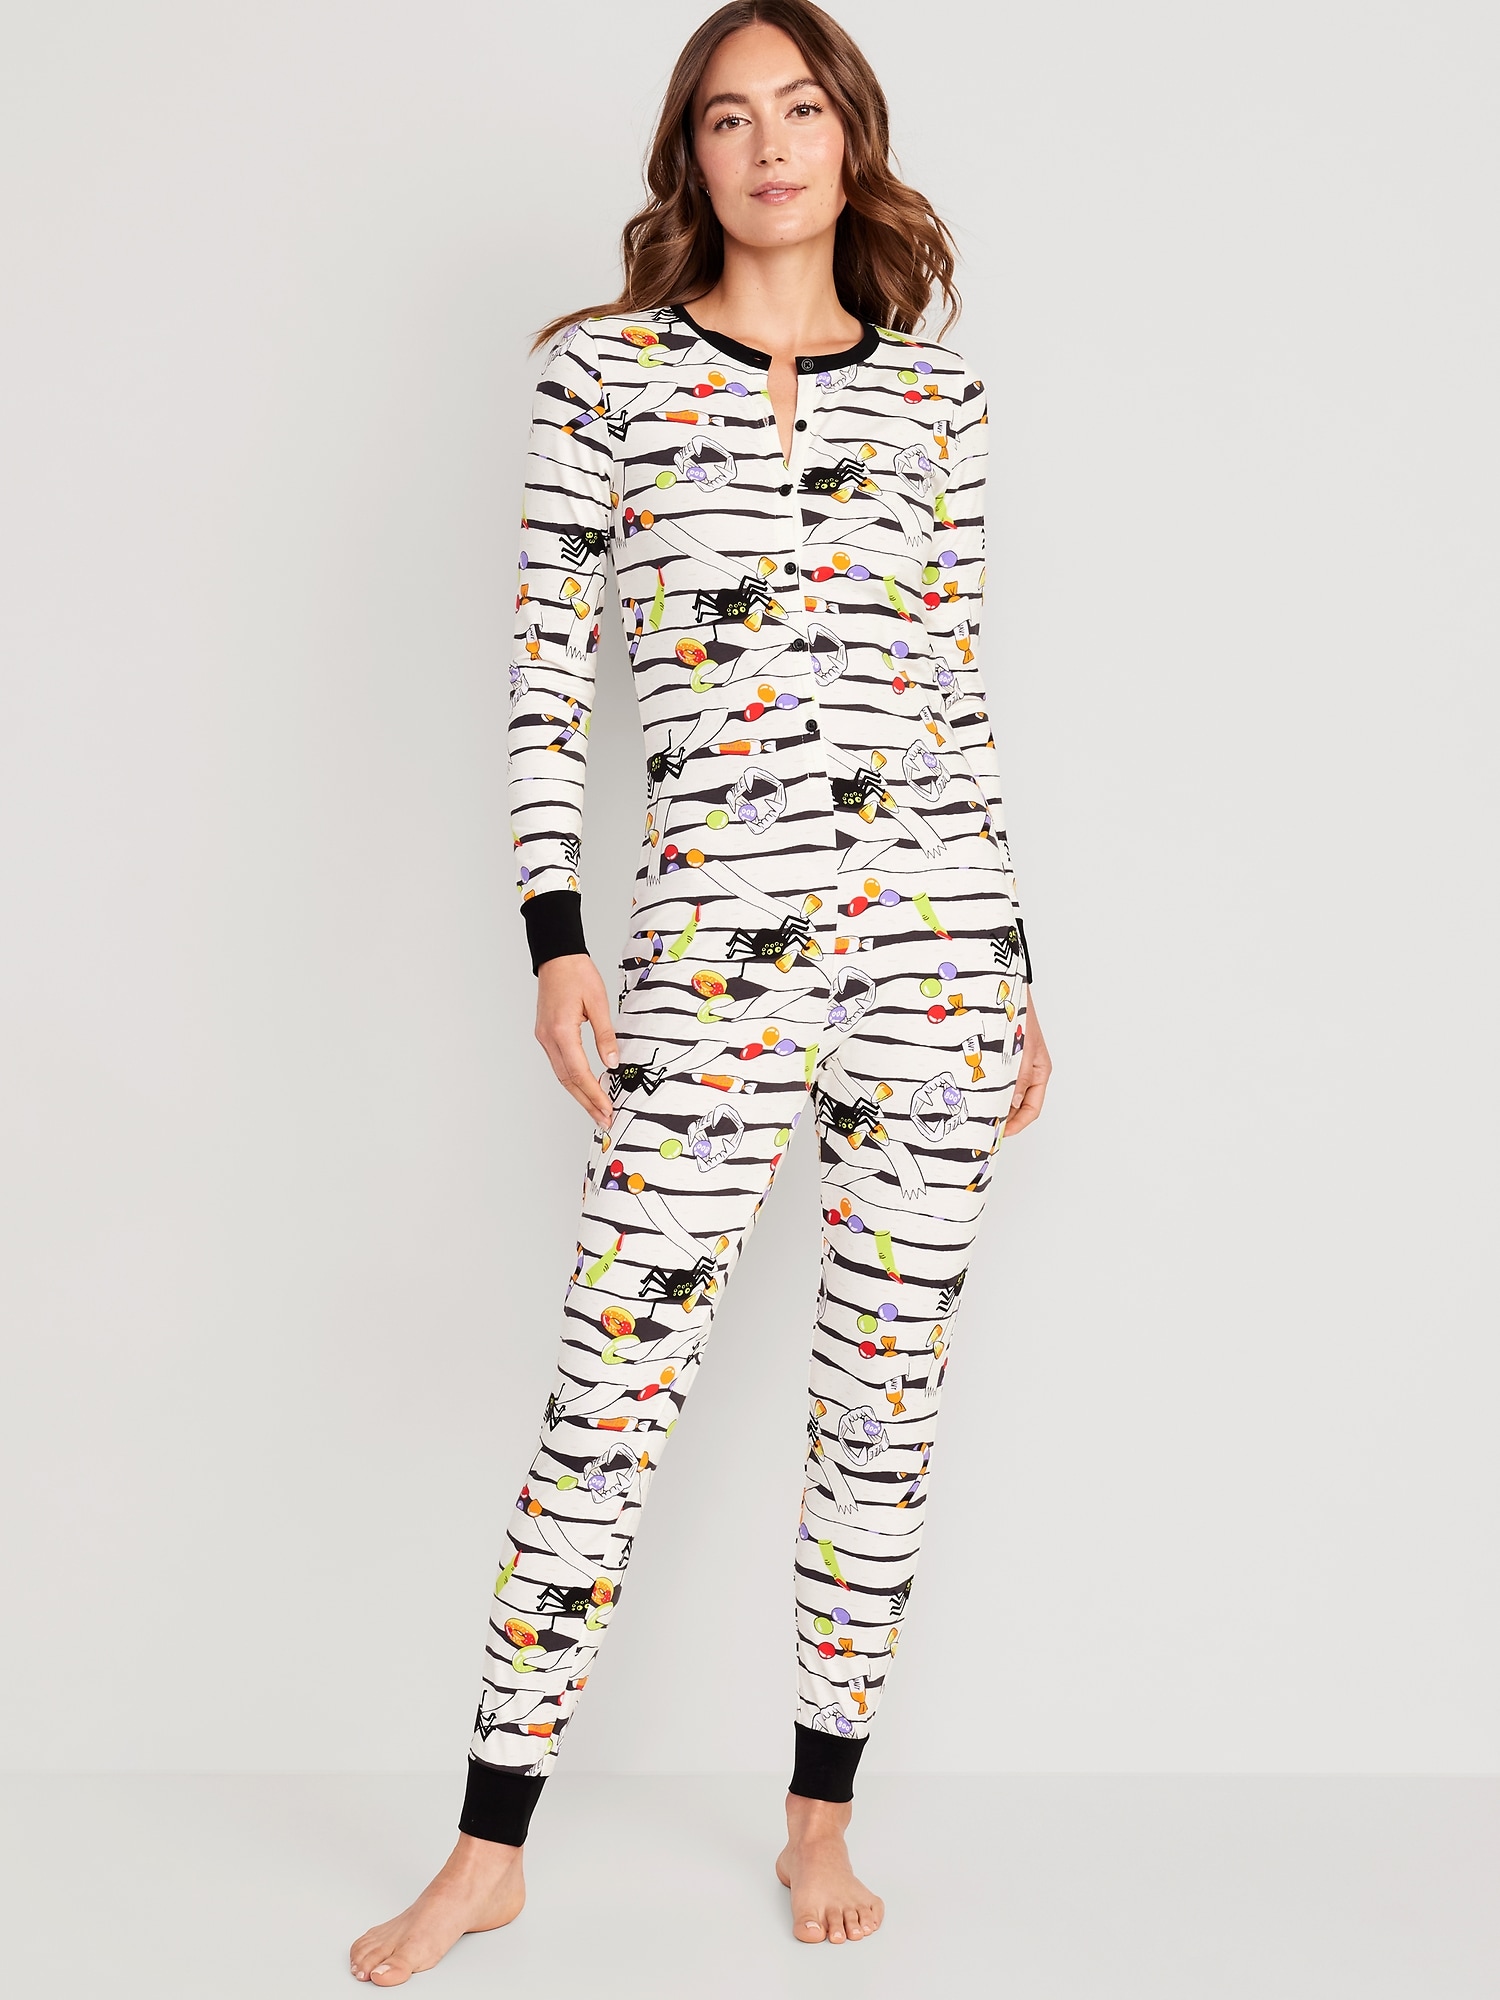 Matching Halloween One-Piece Pajamas for Women | Old Navy